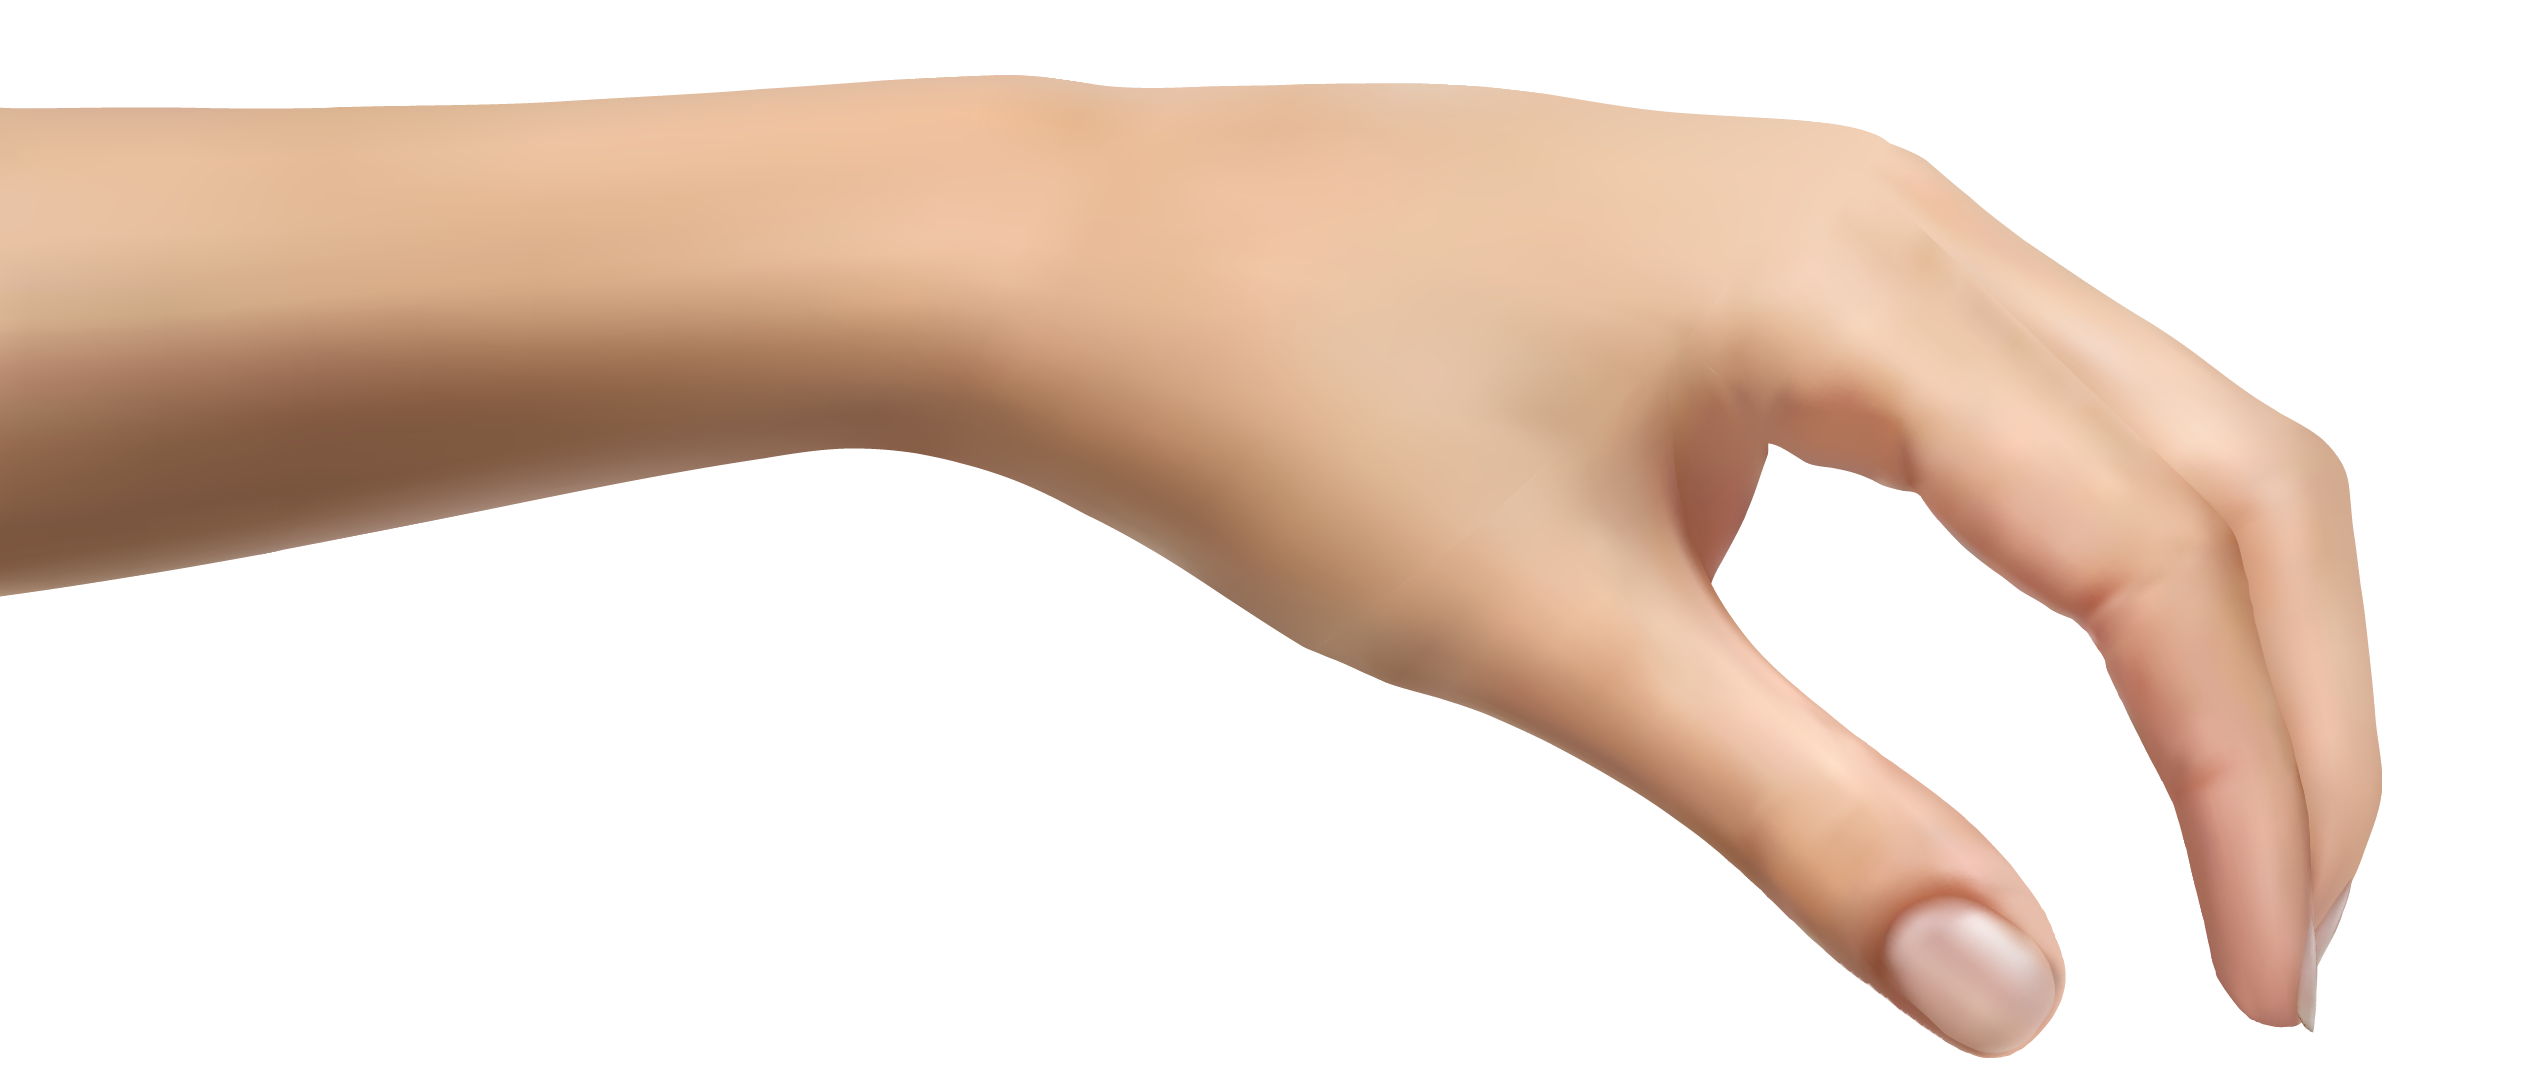 clipart of human hand - photo #12